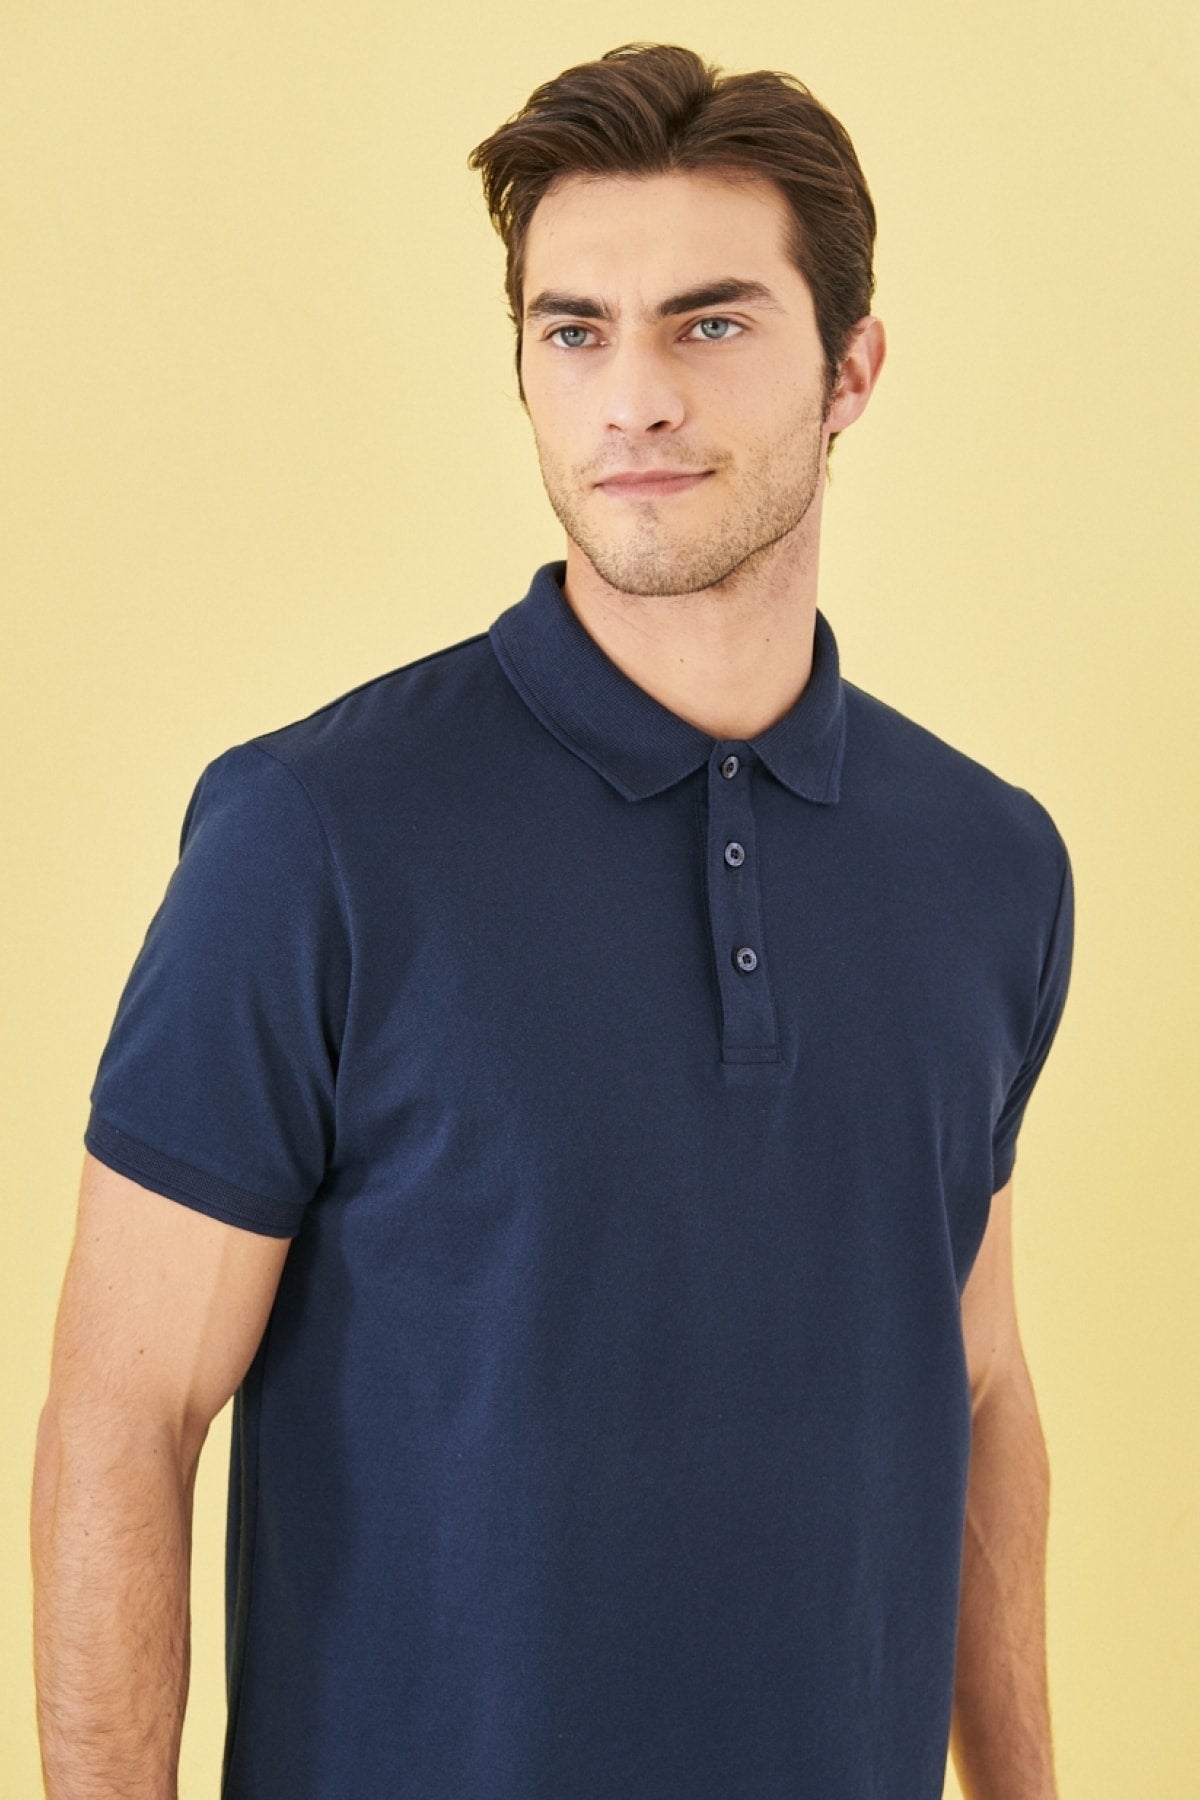 Men's Non-Shrink Cotton Fabric Slim Fit Slim Fit Navy Blue Roll-Up Polo Neck T-Shirt